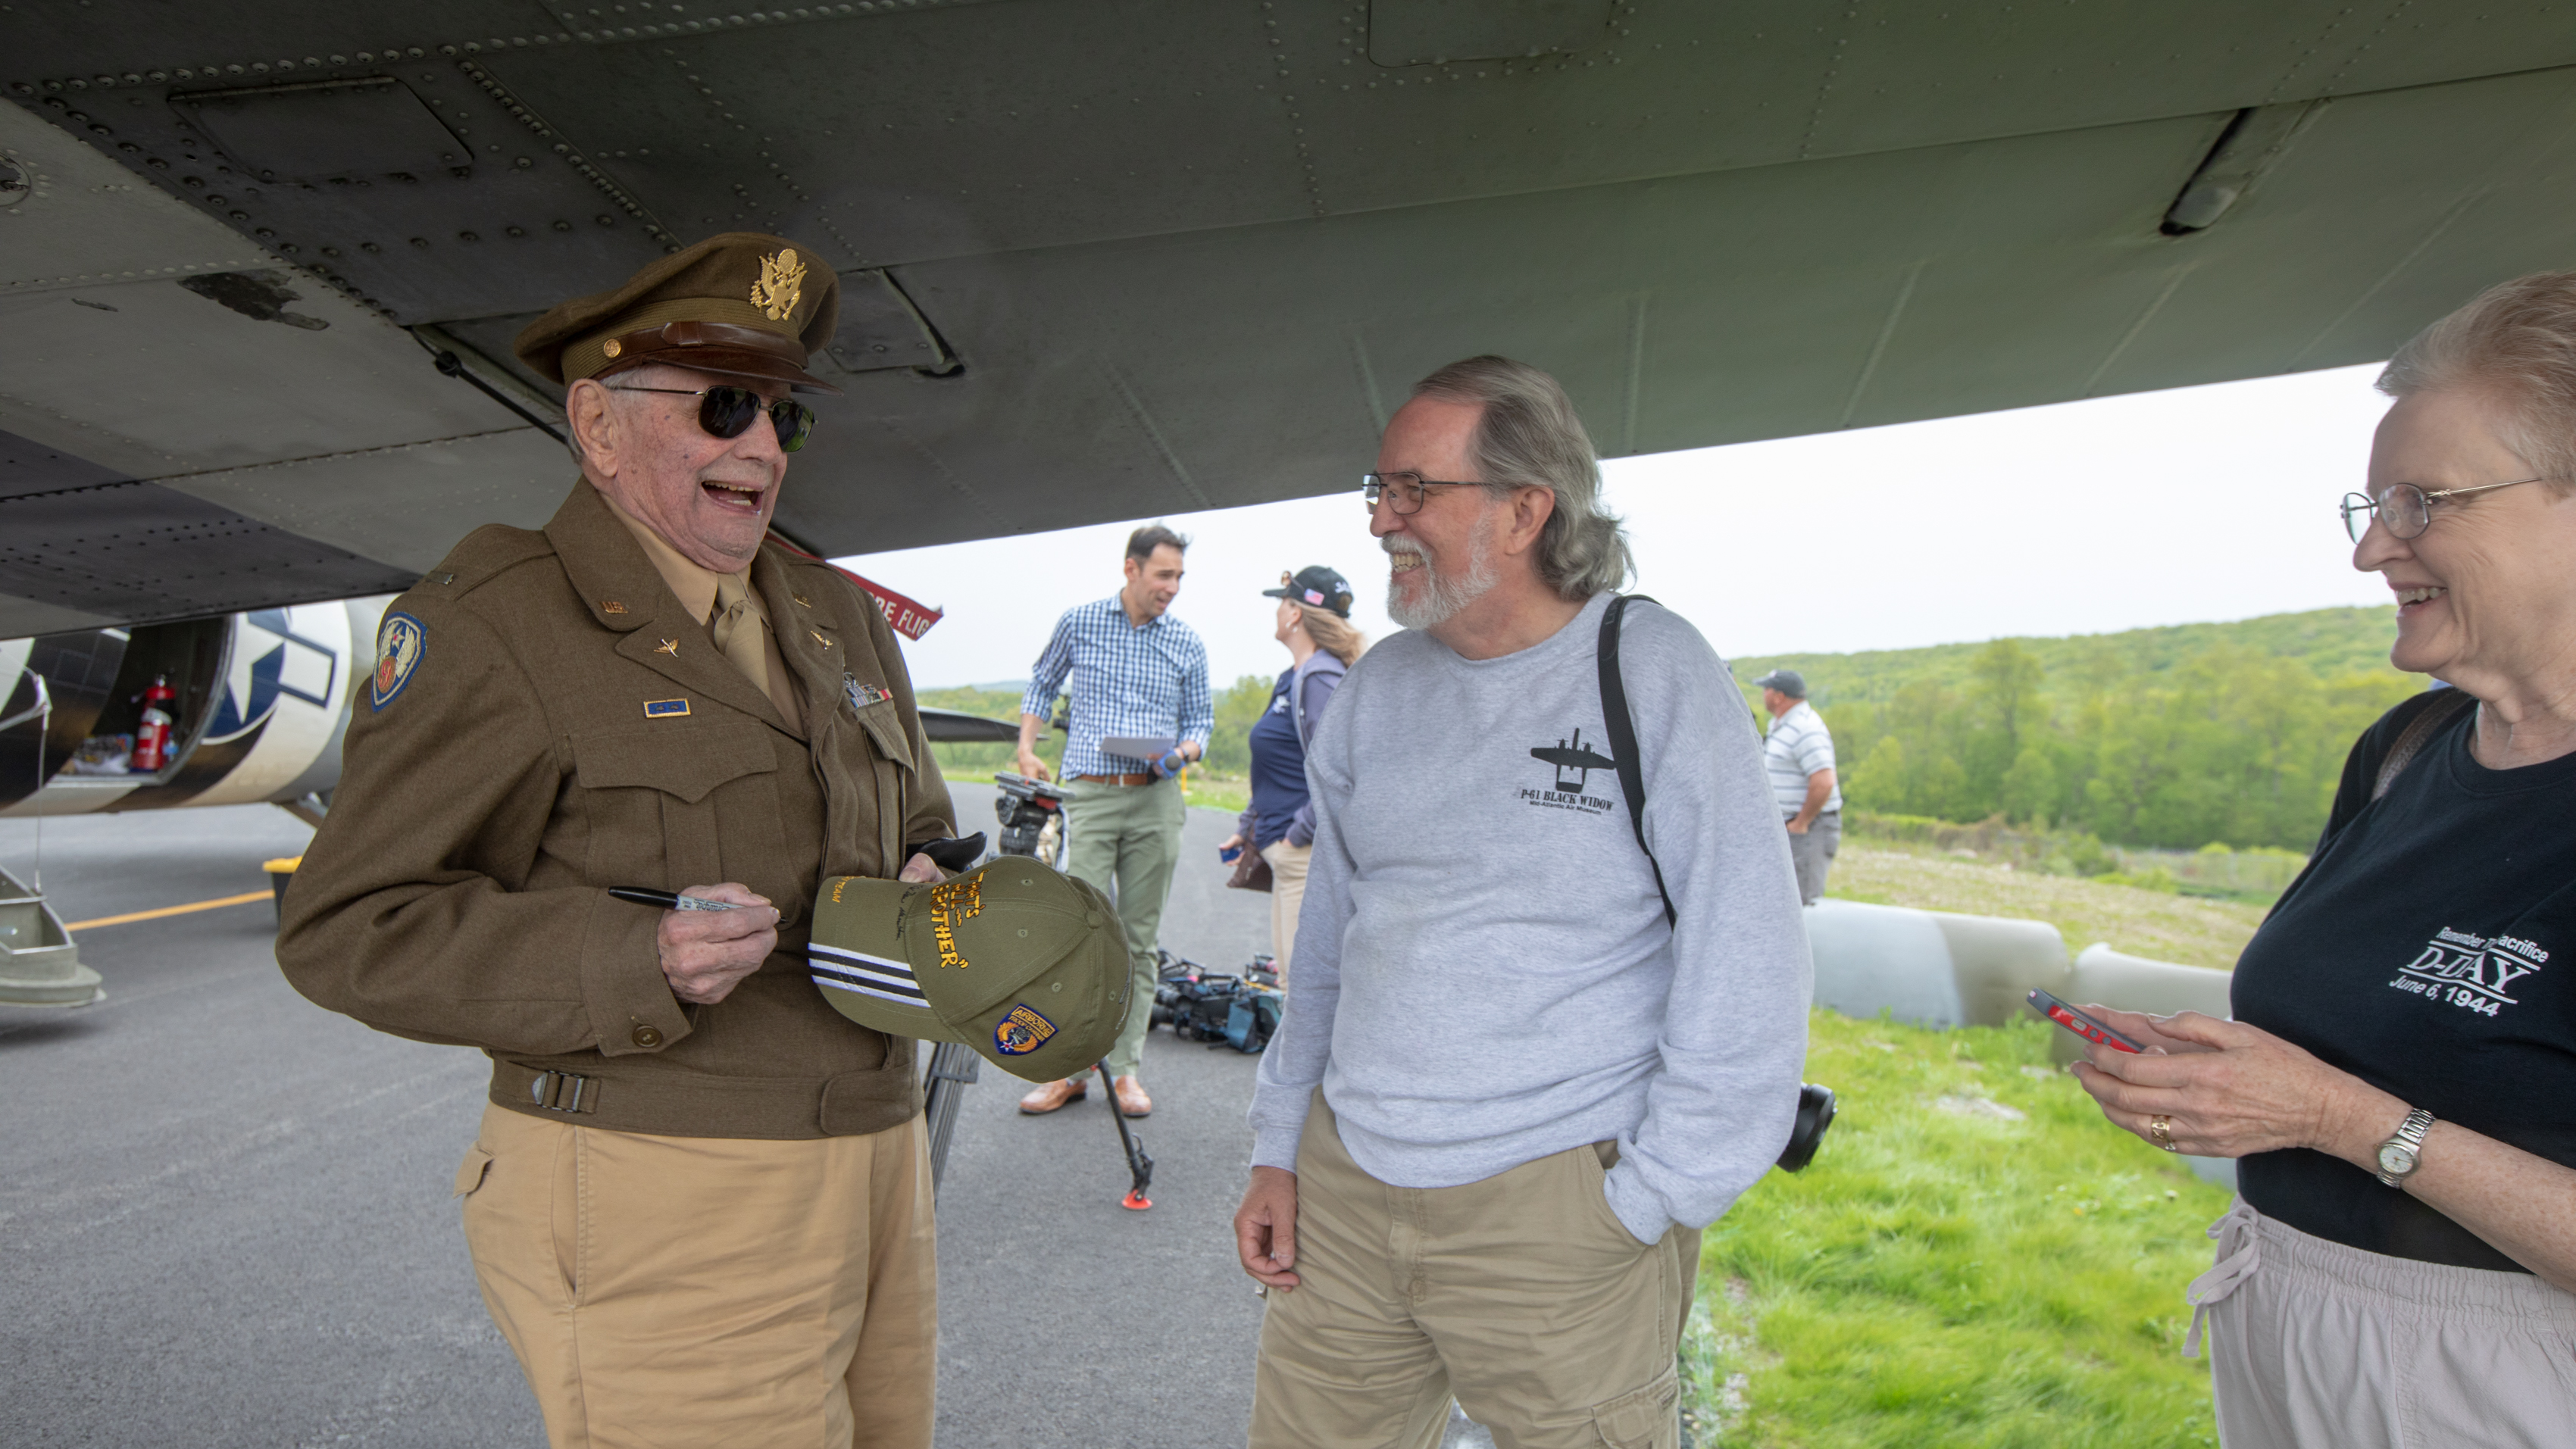 Retired Lt. Col. Dave Hamilton autographs a commemorative cap for Alabama residents Mike and Lorane Brown, who made the trip to Waterbury-Oxford Airport in Connecticut to see the D-Day Squadron. Photo by Jim Moore.